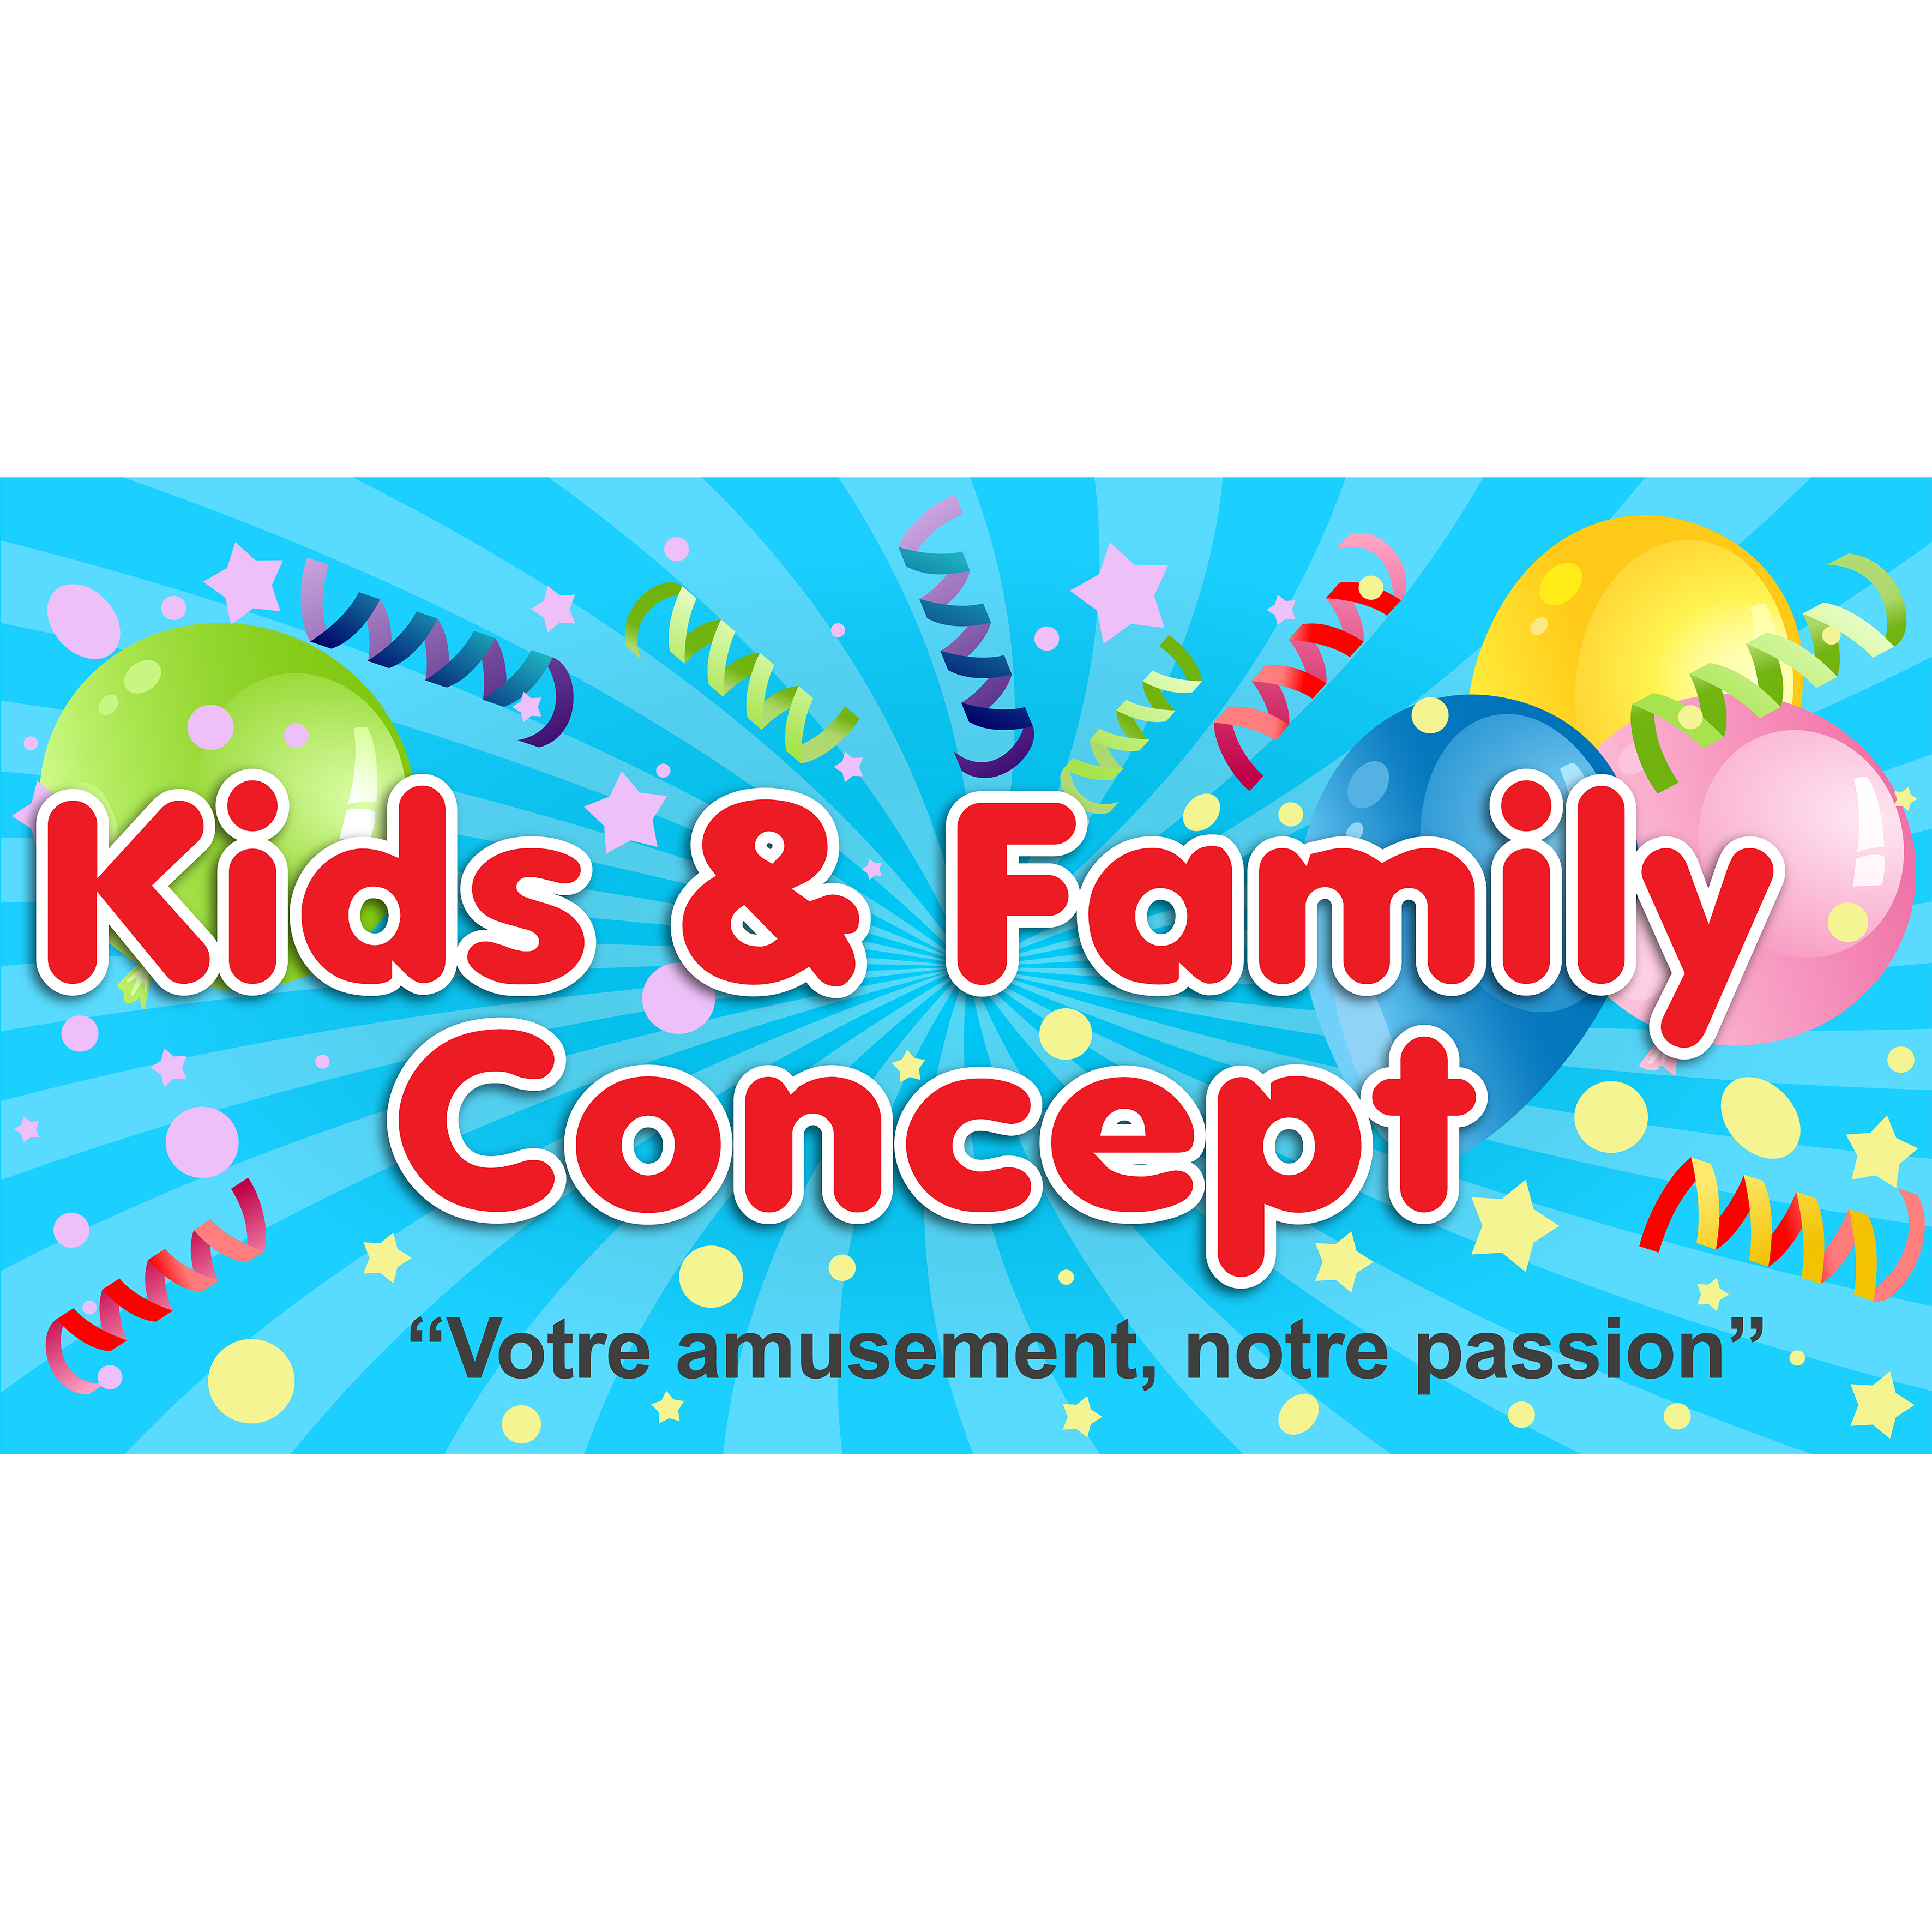 Kids & Family Concept (Food-Truck)